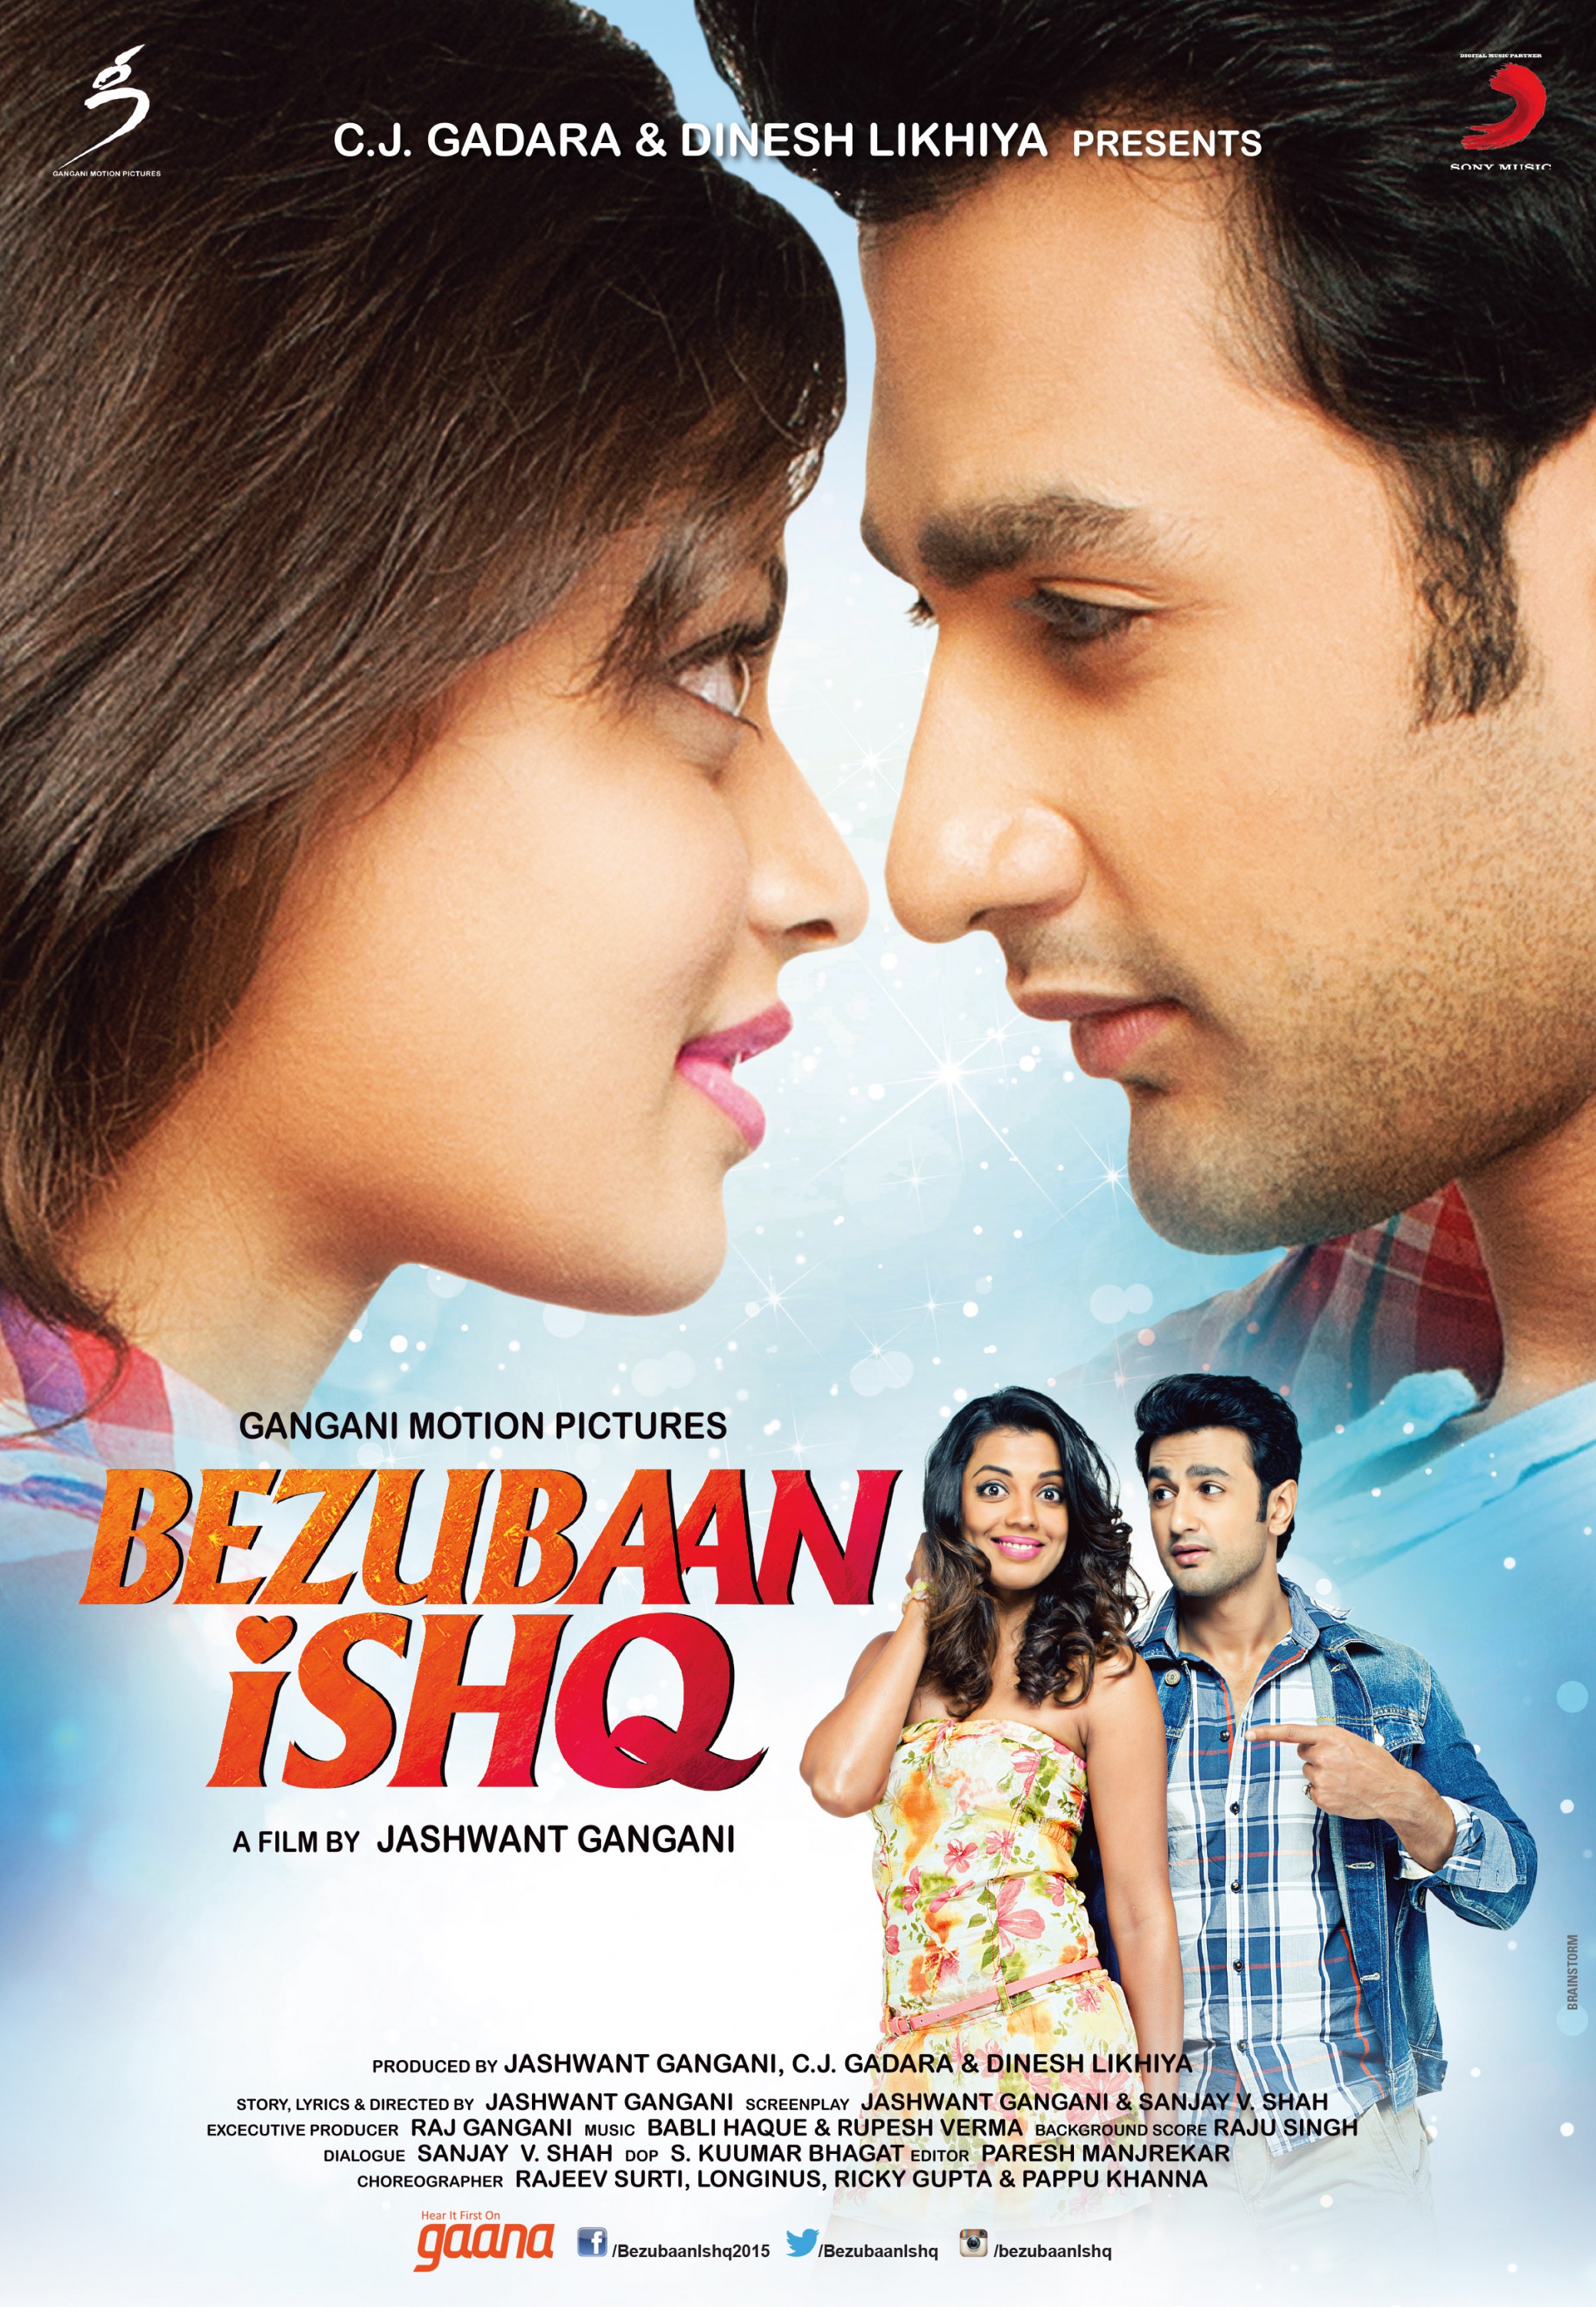 Mega Sized Movie Poster Image for Bezubaan Ishq (#1 of 4)